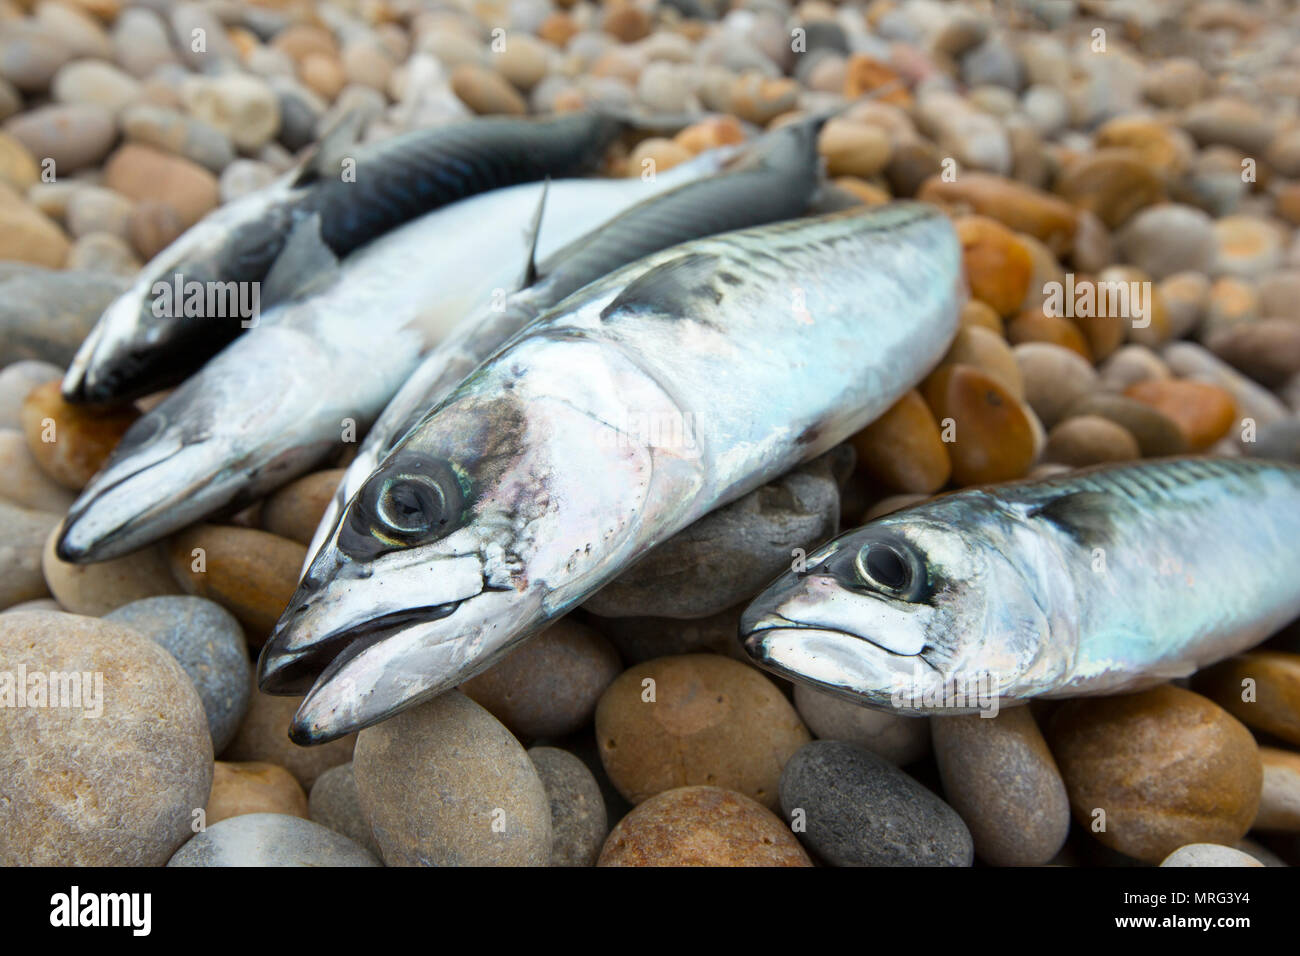 Mackerel, Scomber scombrus, that have been caught fishing from the shore on Chesil beach using a spinning rod with a fixed spool reel, a string of thr Stock Photo